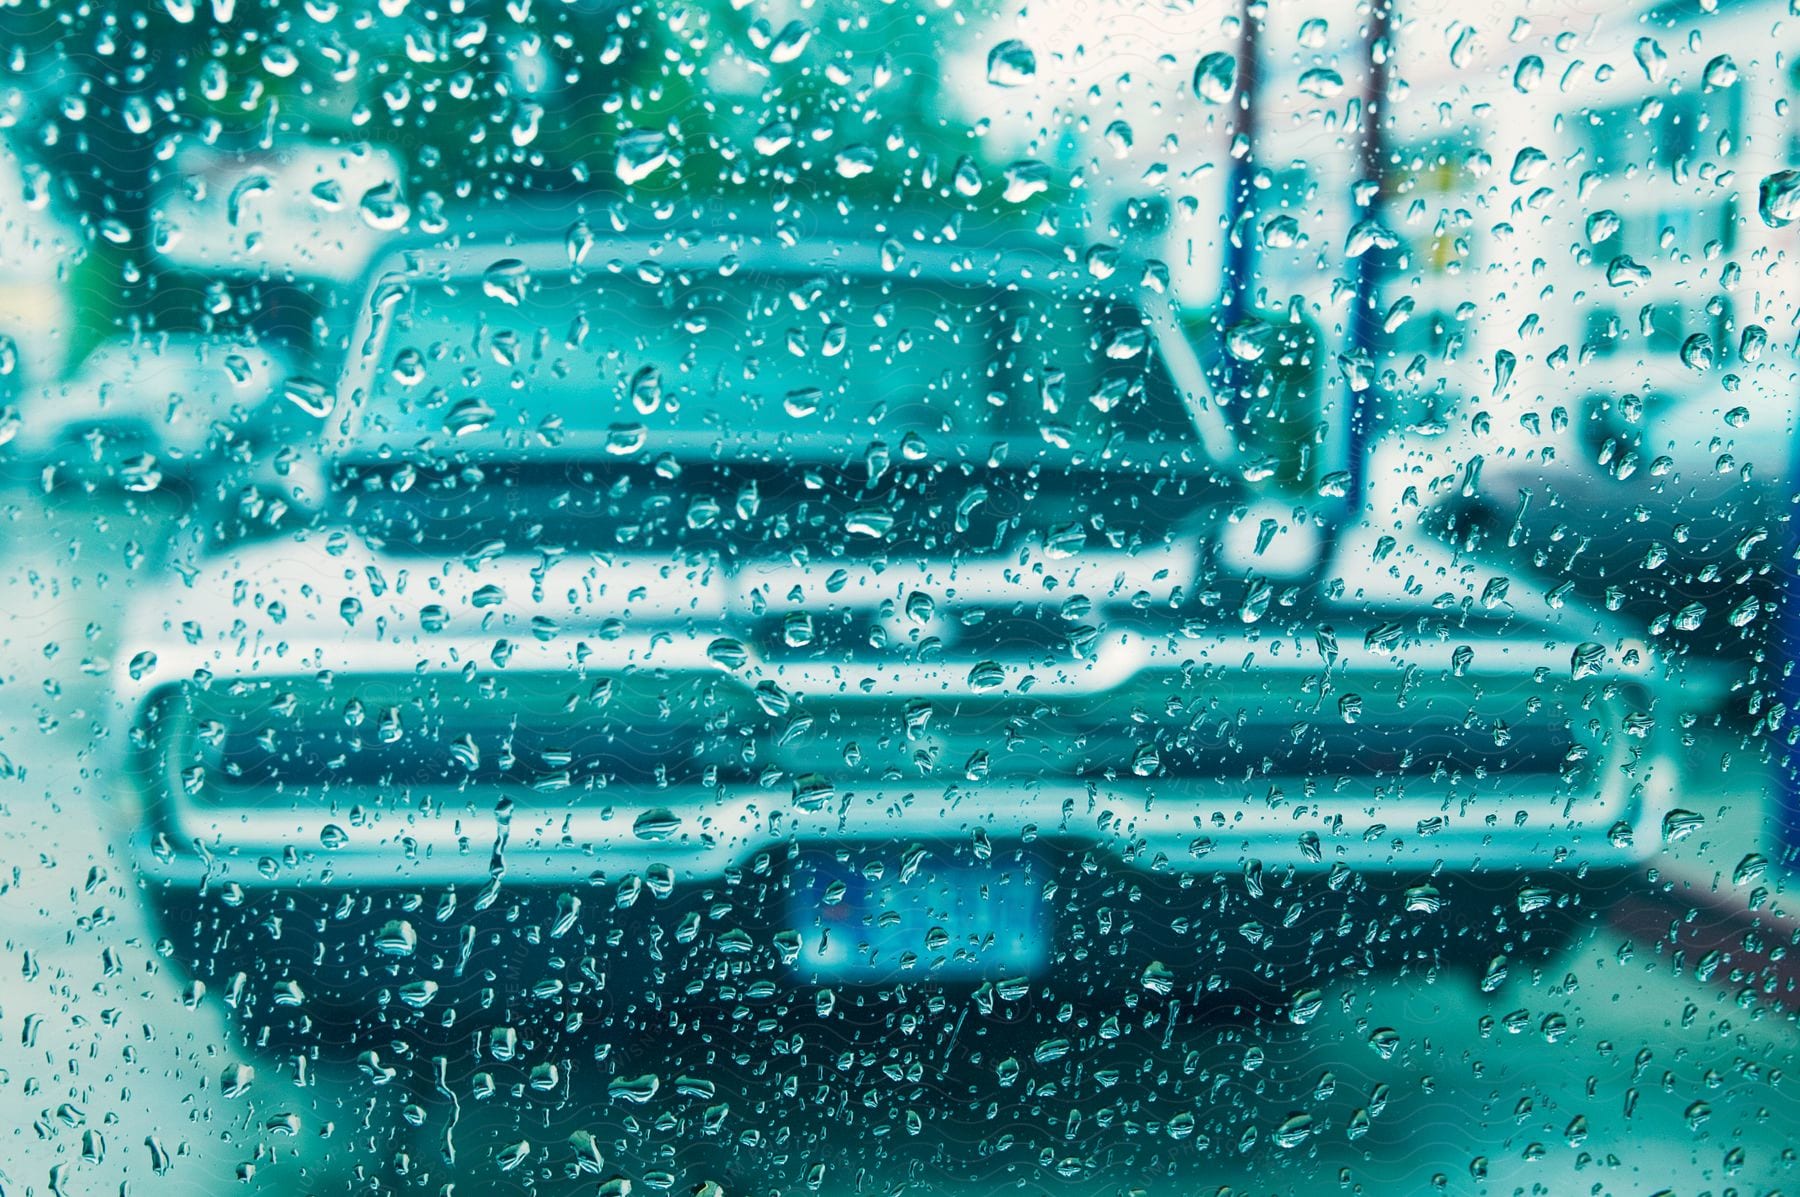 An old car seen through a watersplashed glass